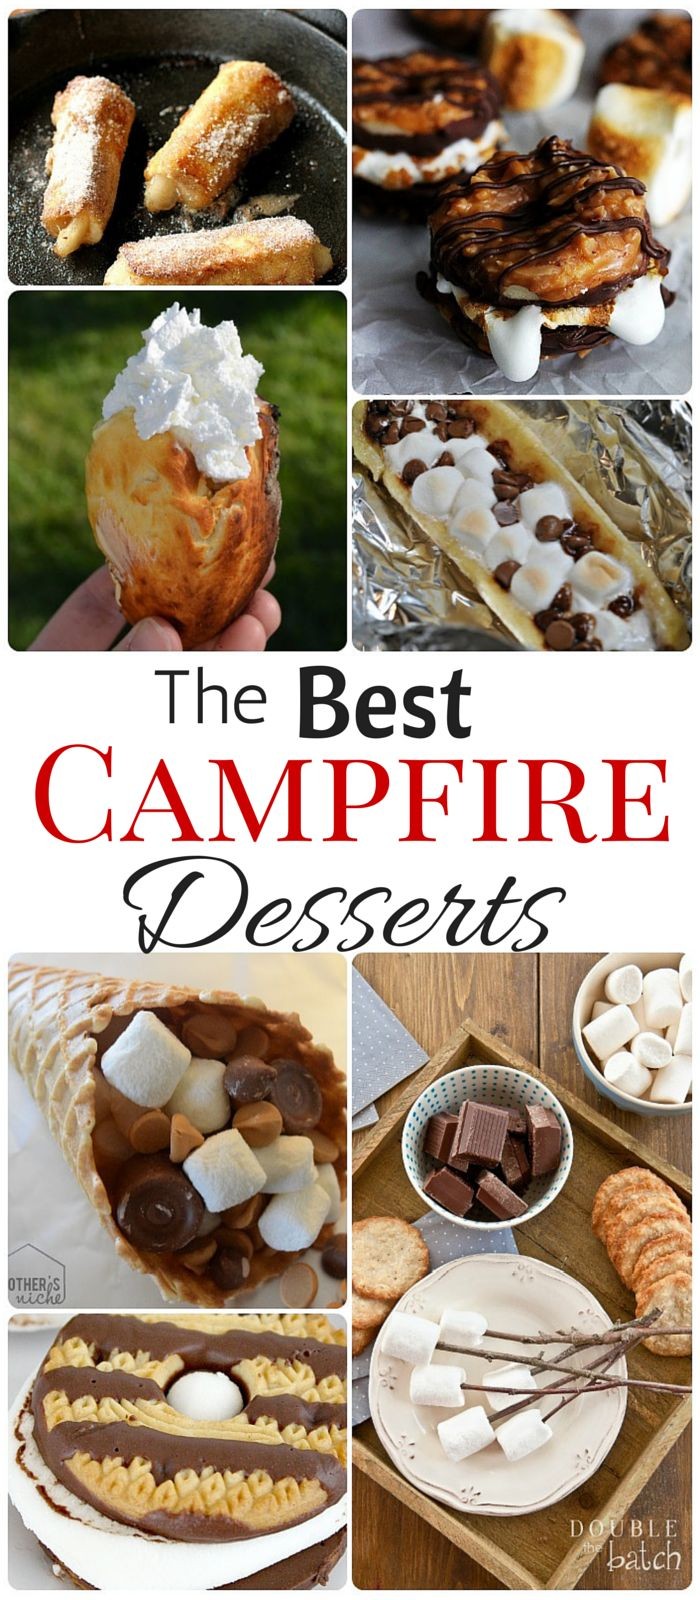 Nothing better than desserts around the campfire!...